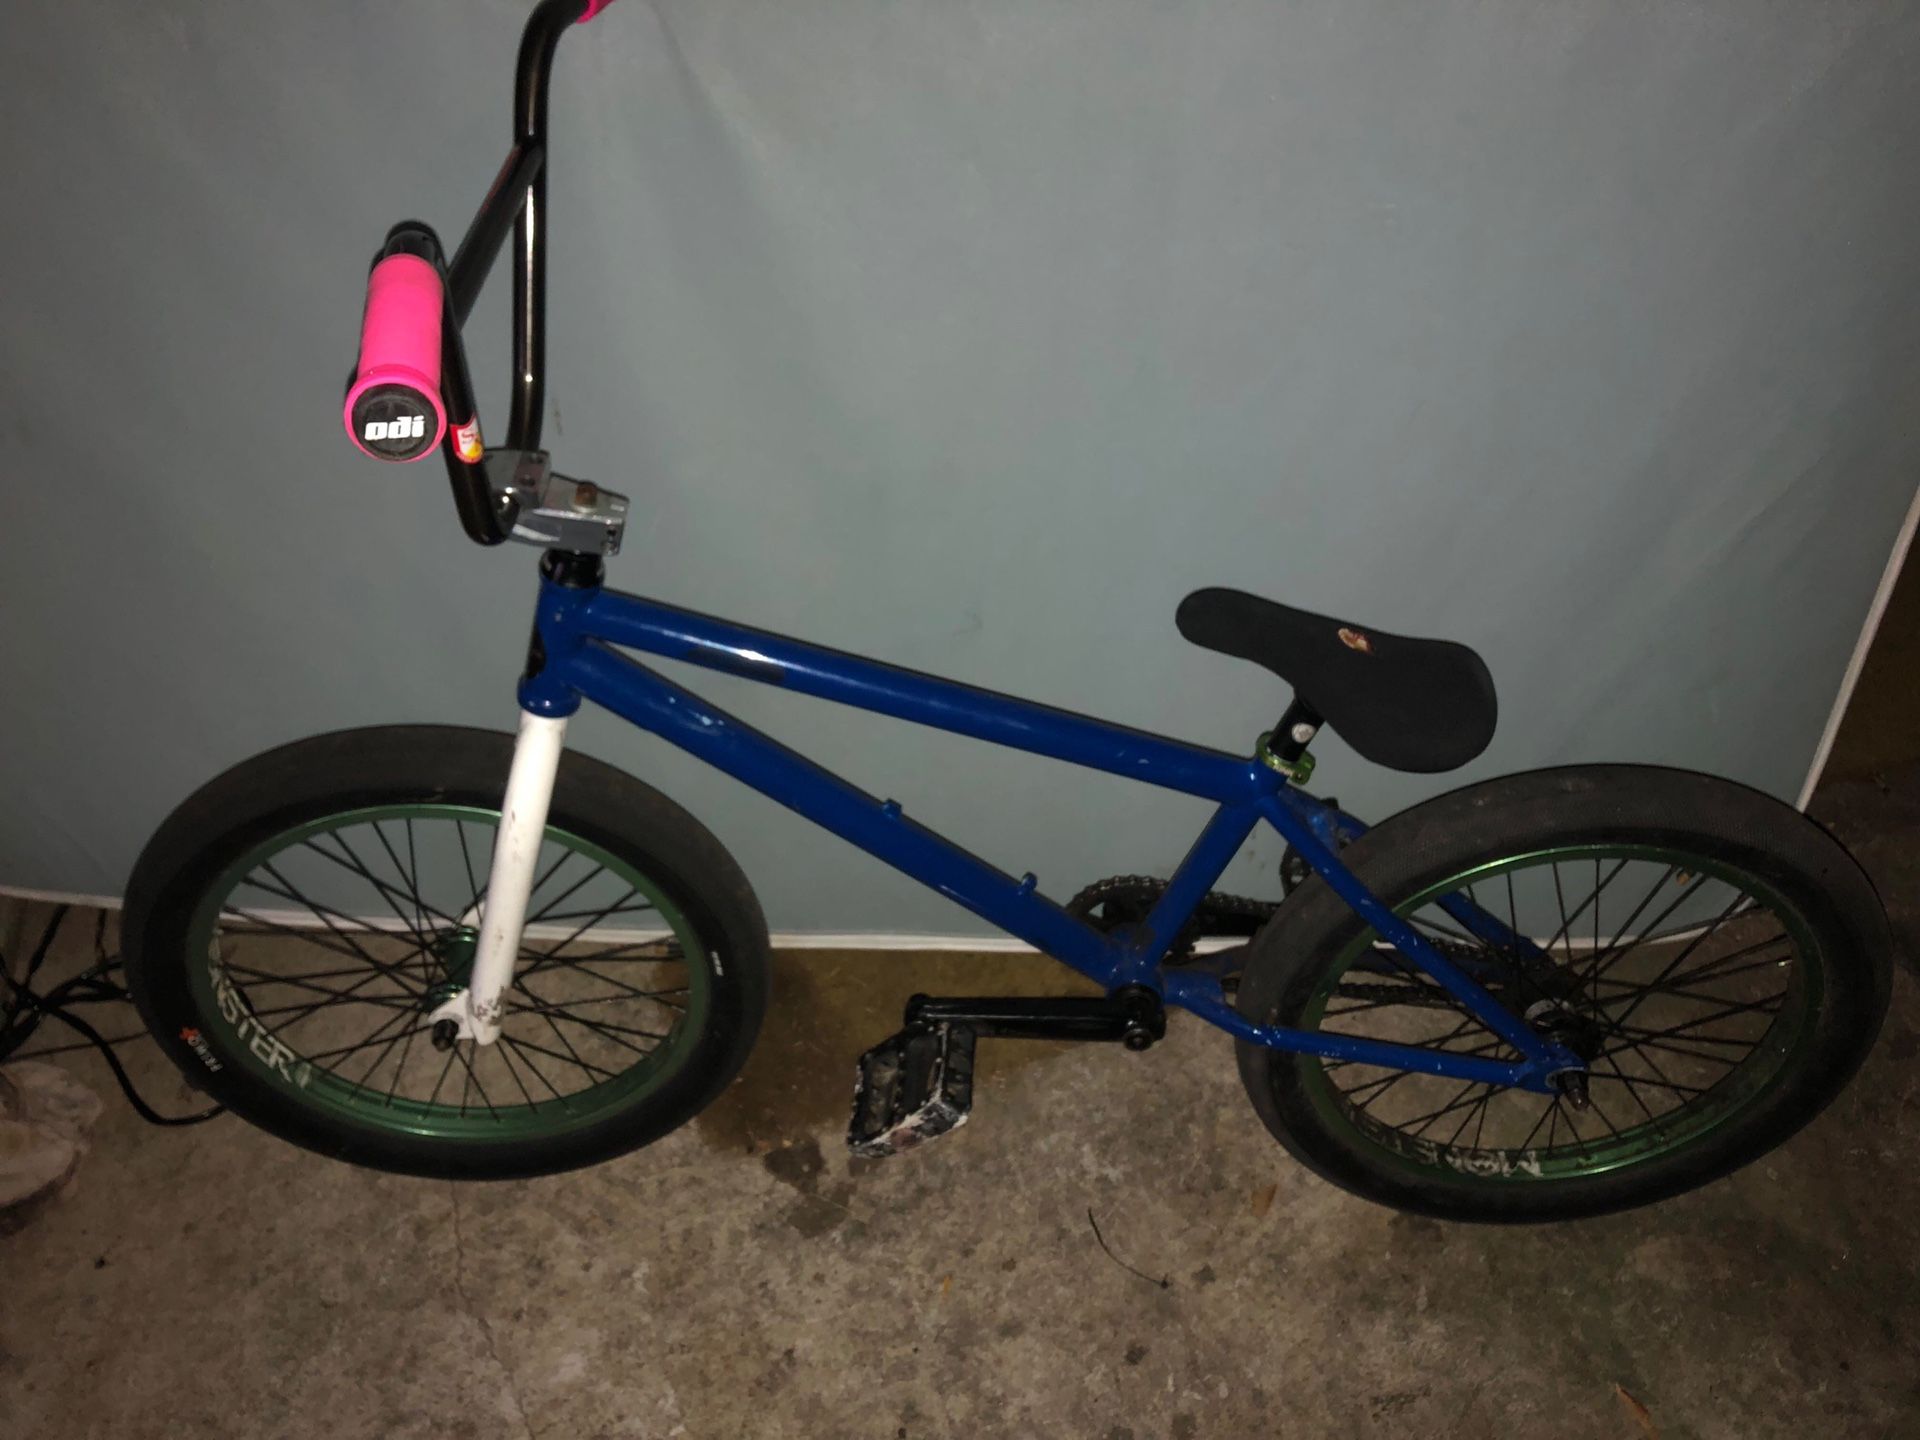 Bmx bike will trade for gaming pc or heady glass